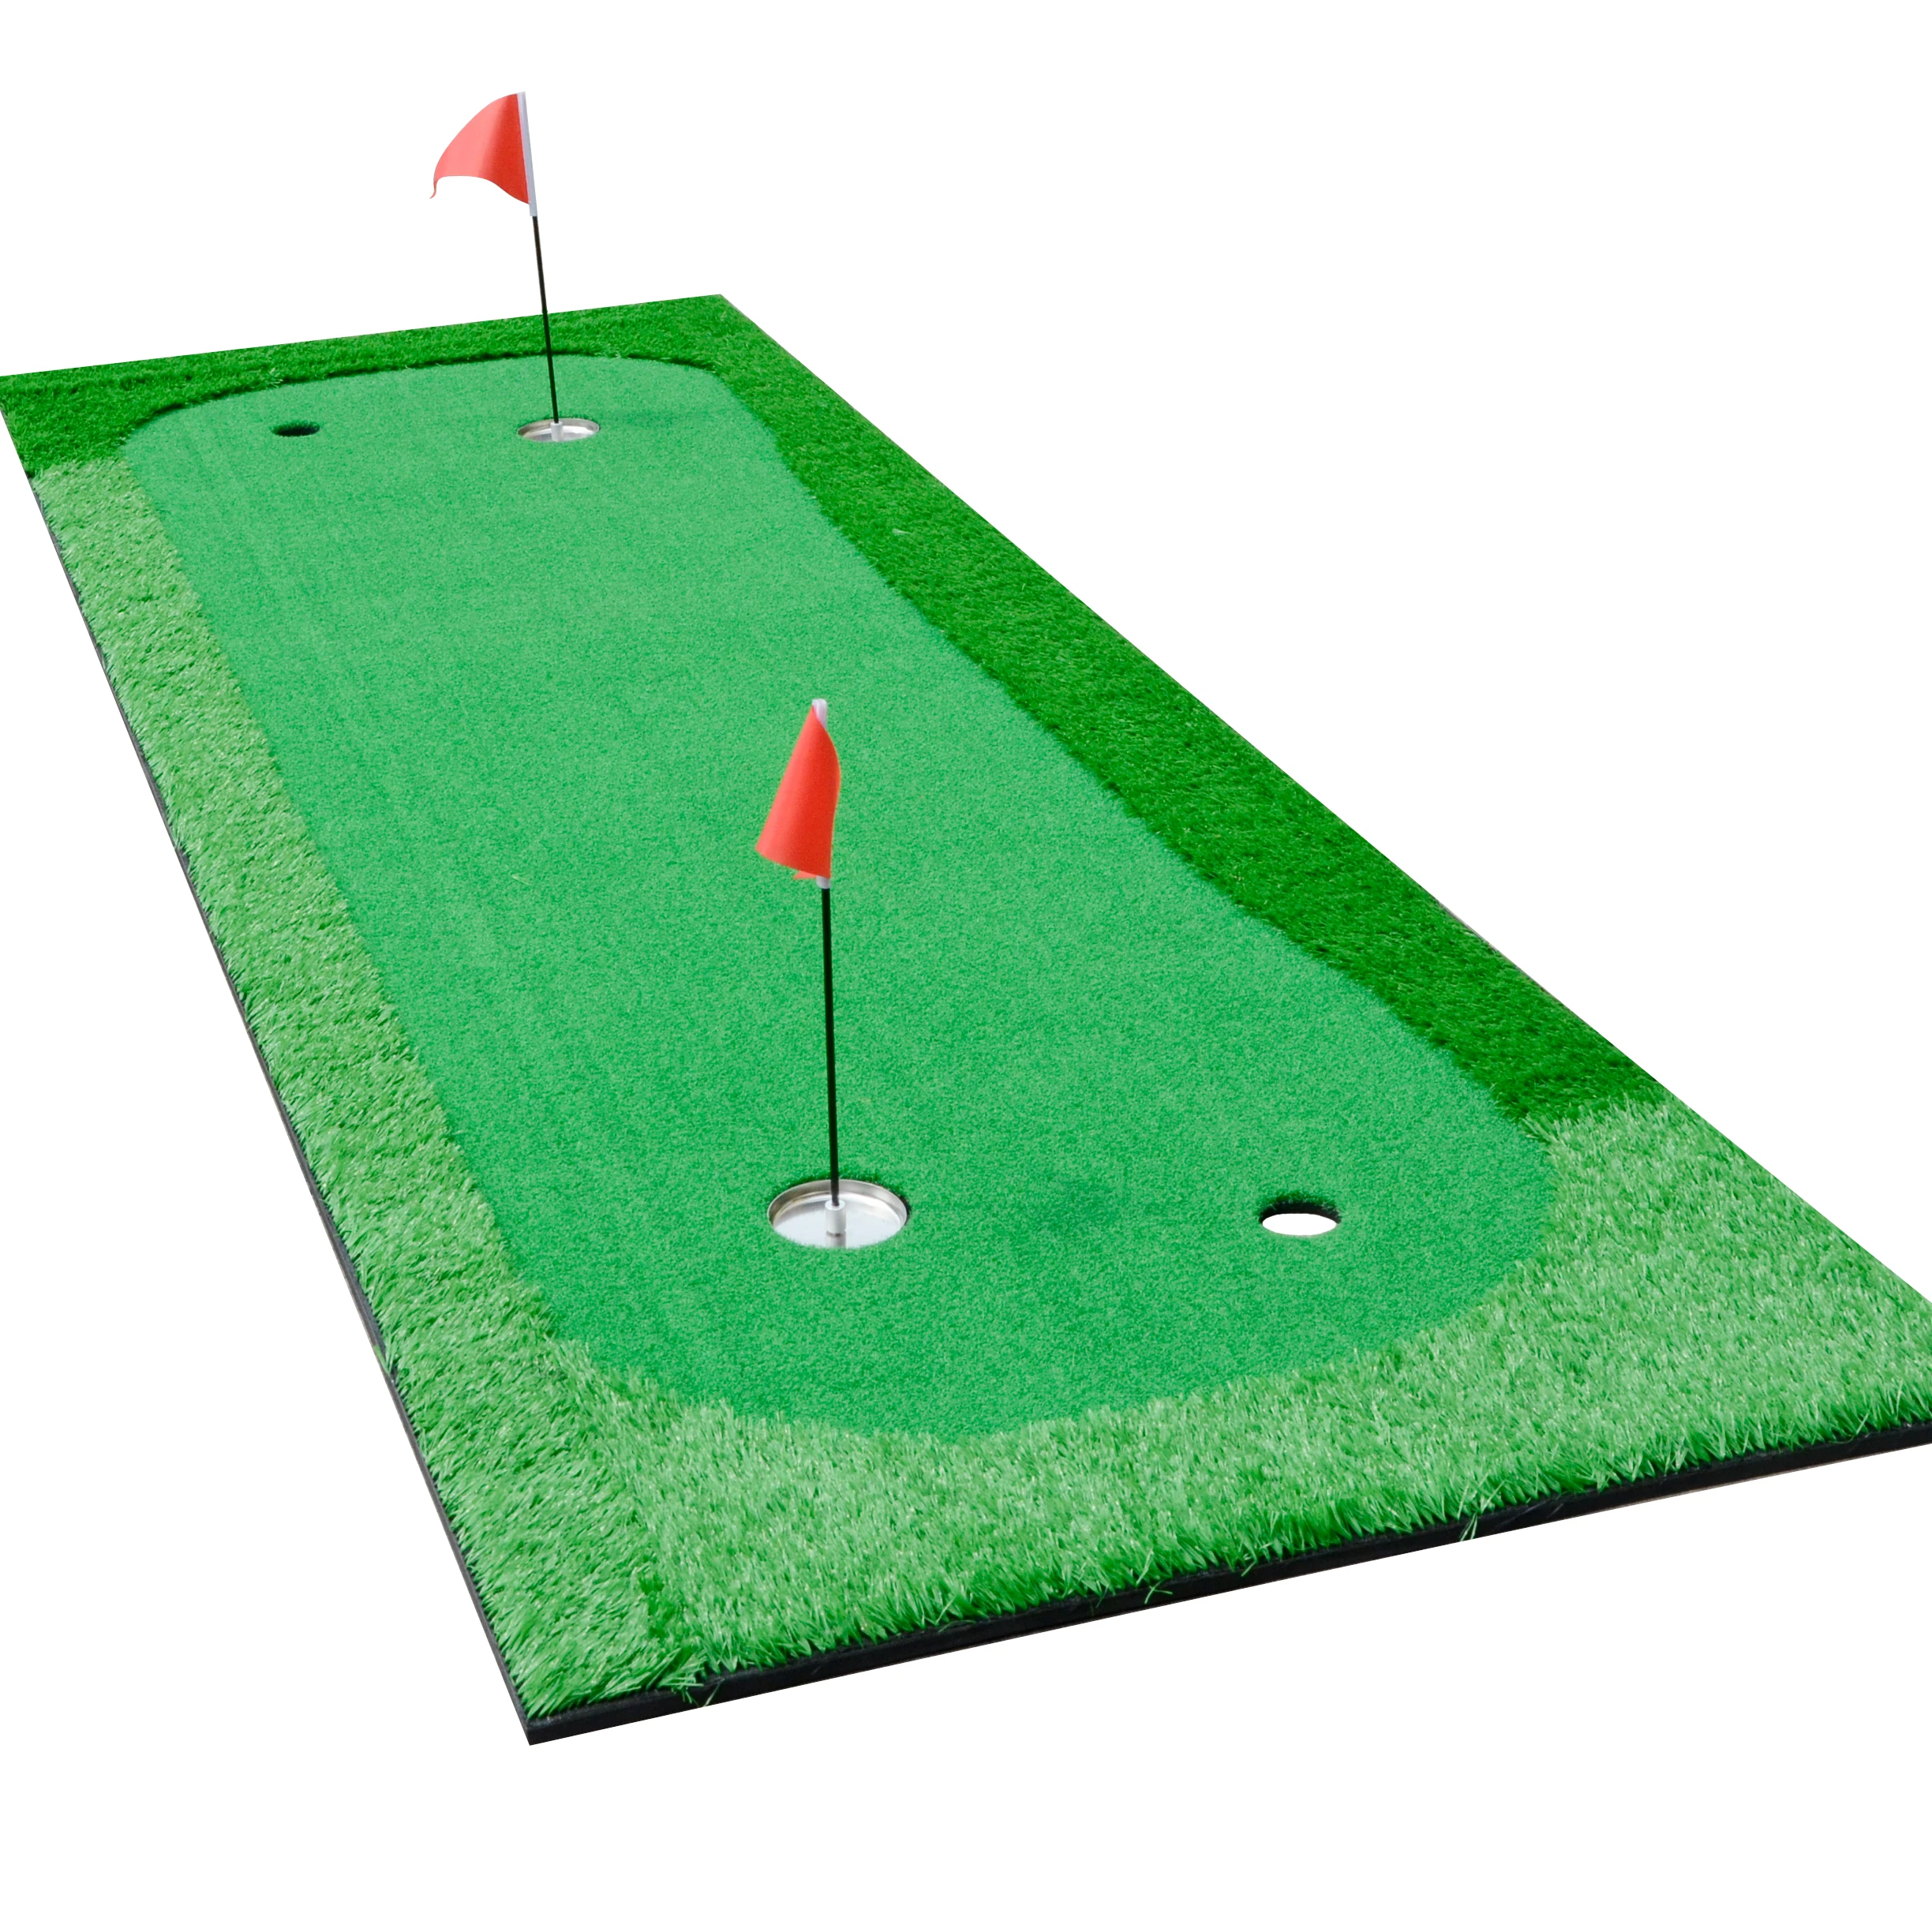 

Professional two way putting practice mat/golf practice/ Artificial turf golf hitting range mat, Green and combination